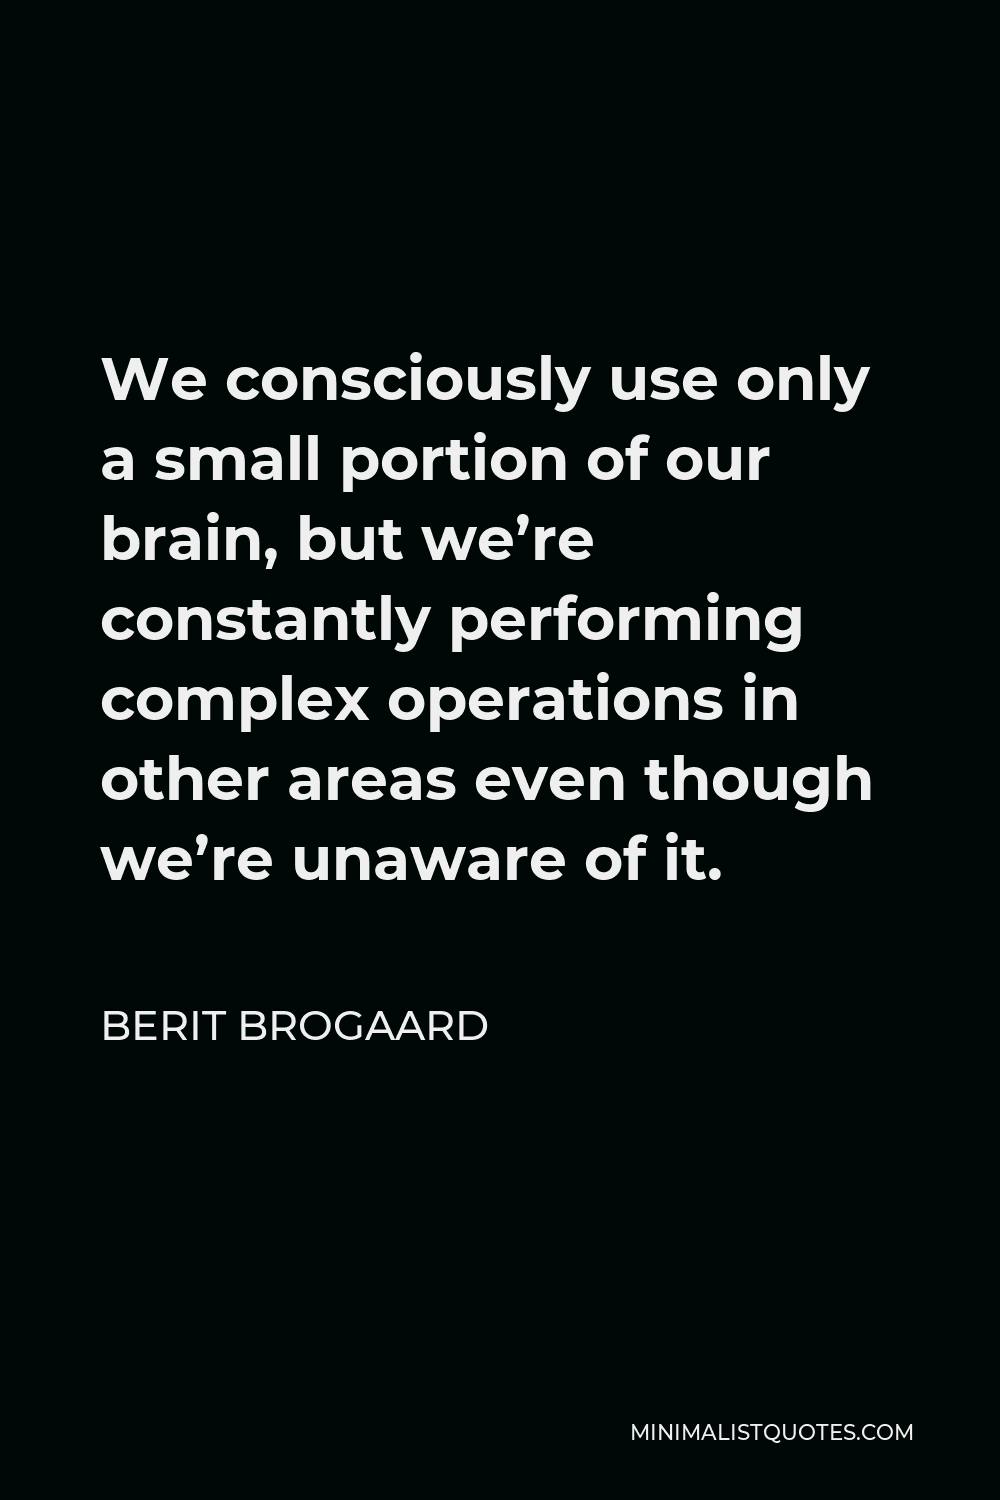 Berit Brogaard Quote - We consciously use only a small portion of our brain, but we’re constantly performing complex operations in other areas even though we’re unaware of it.